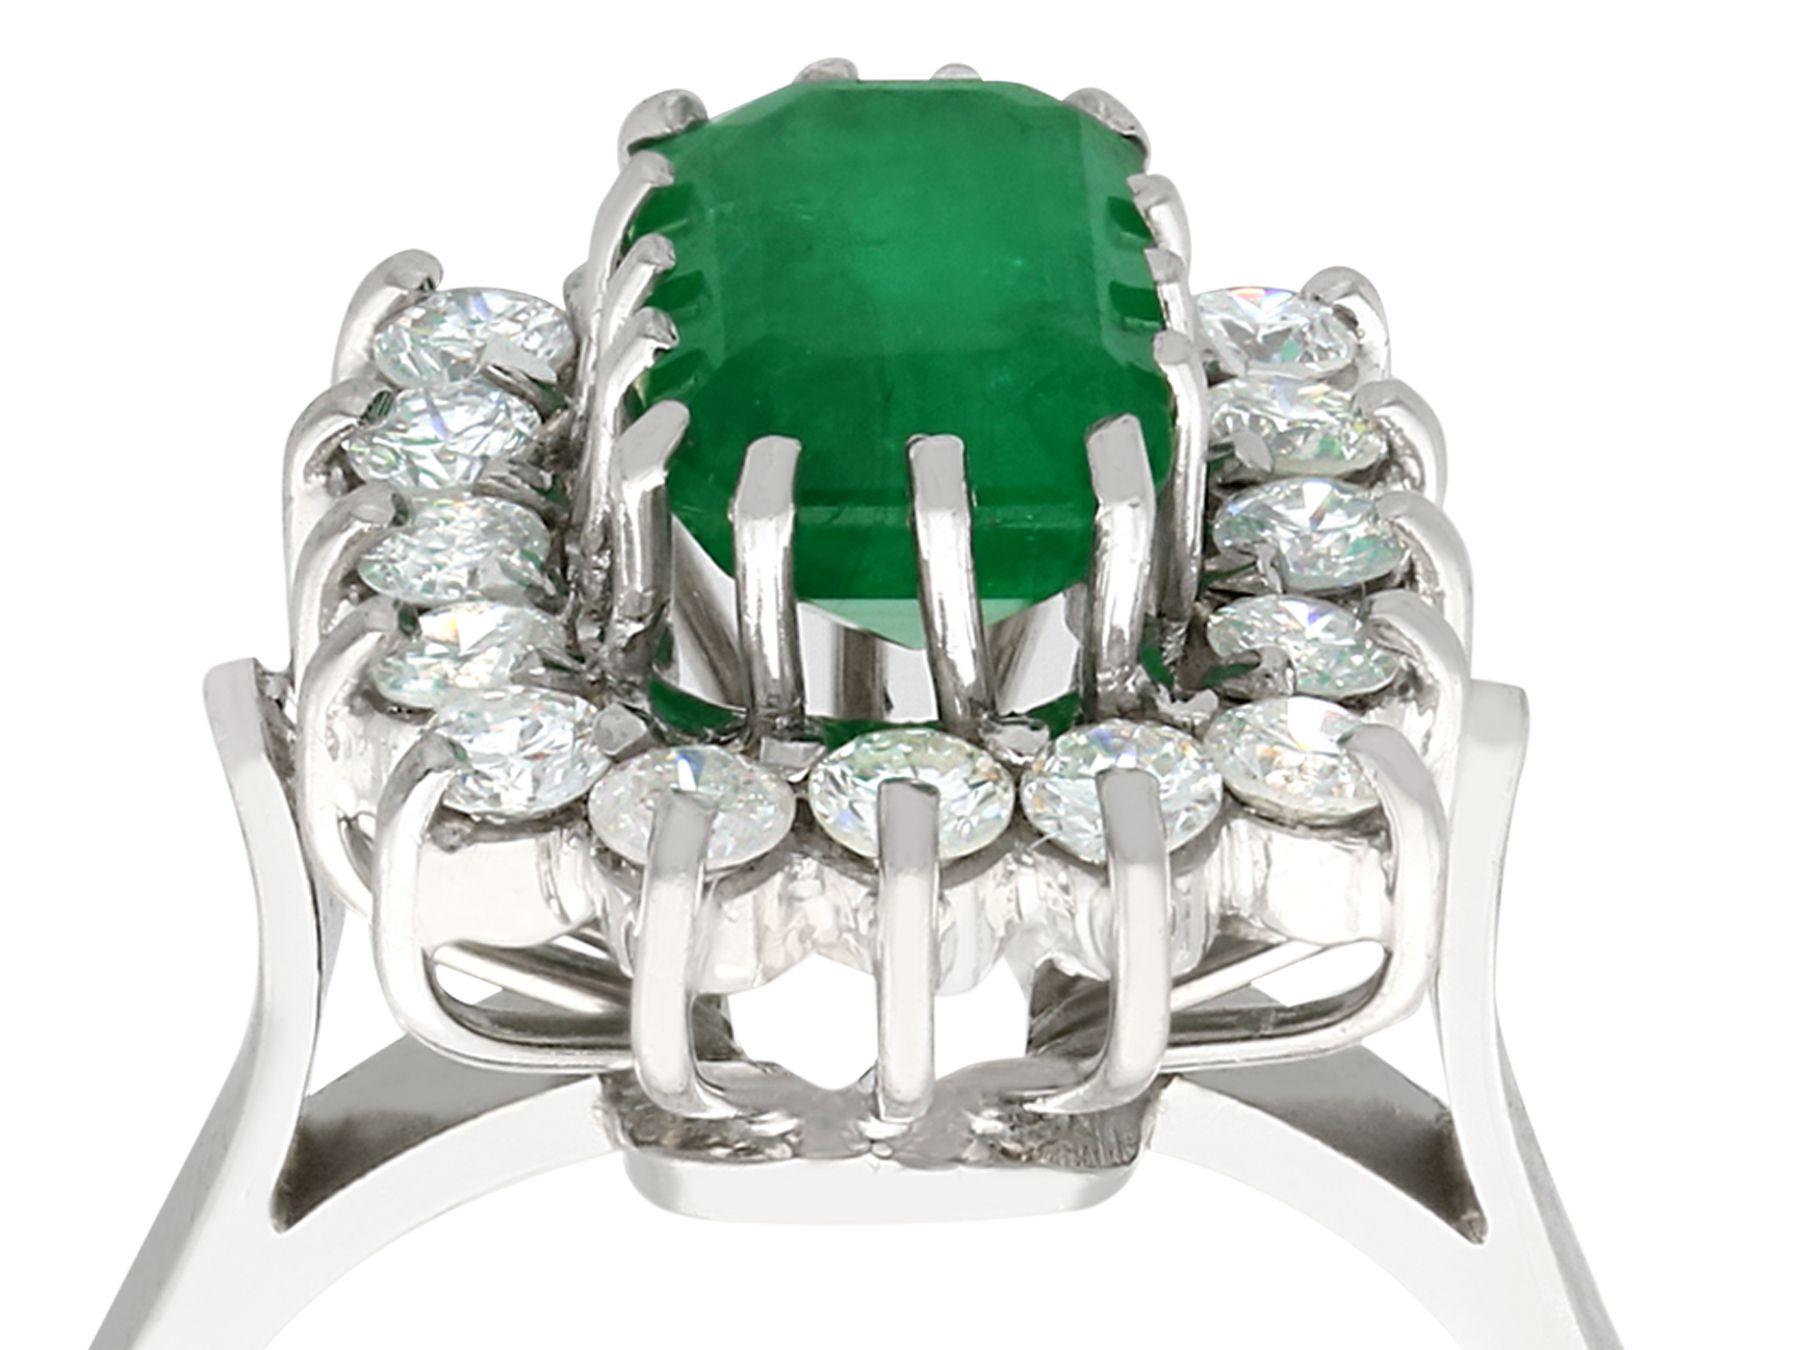 An impressive vintage 2.19 carat emerald and 0.65 carat diamond, 18 karat white gold cluster ring; an addition to our vintage jewelry and estate jewelry collections.

This fine and impressive diamond and emerald cocktail ring has been crafted in 18k